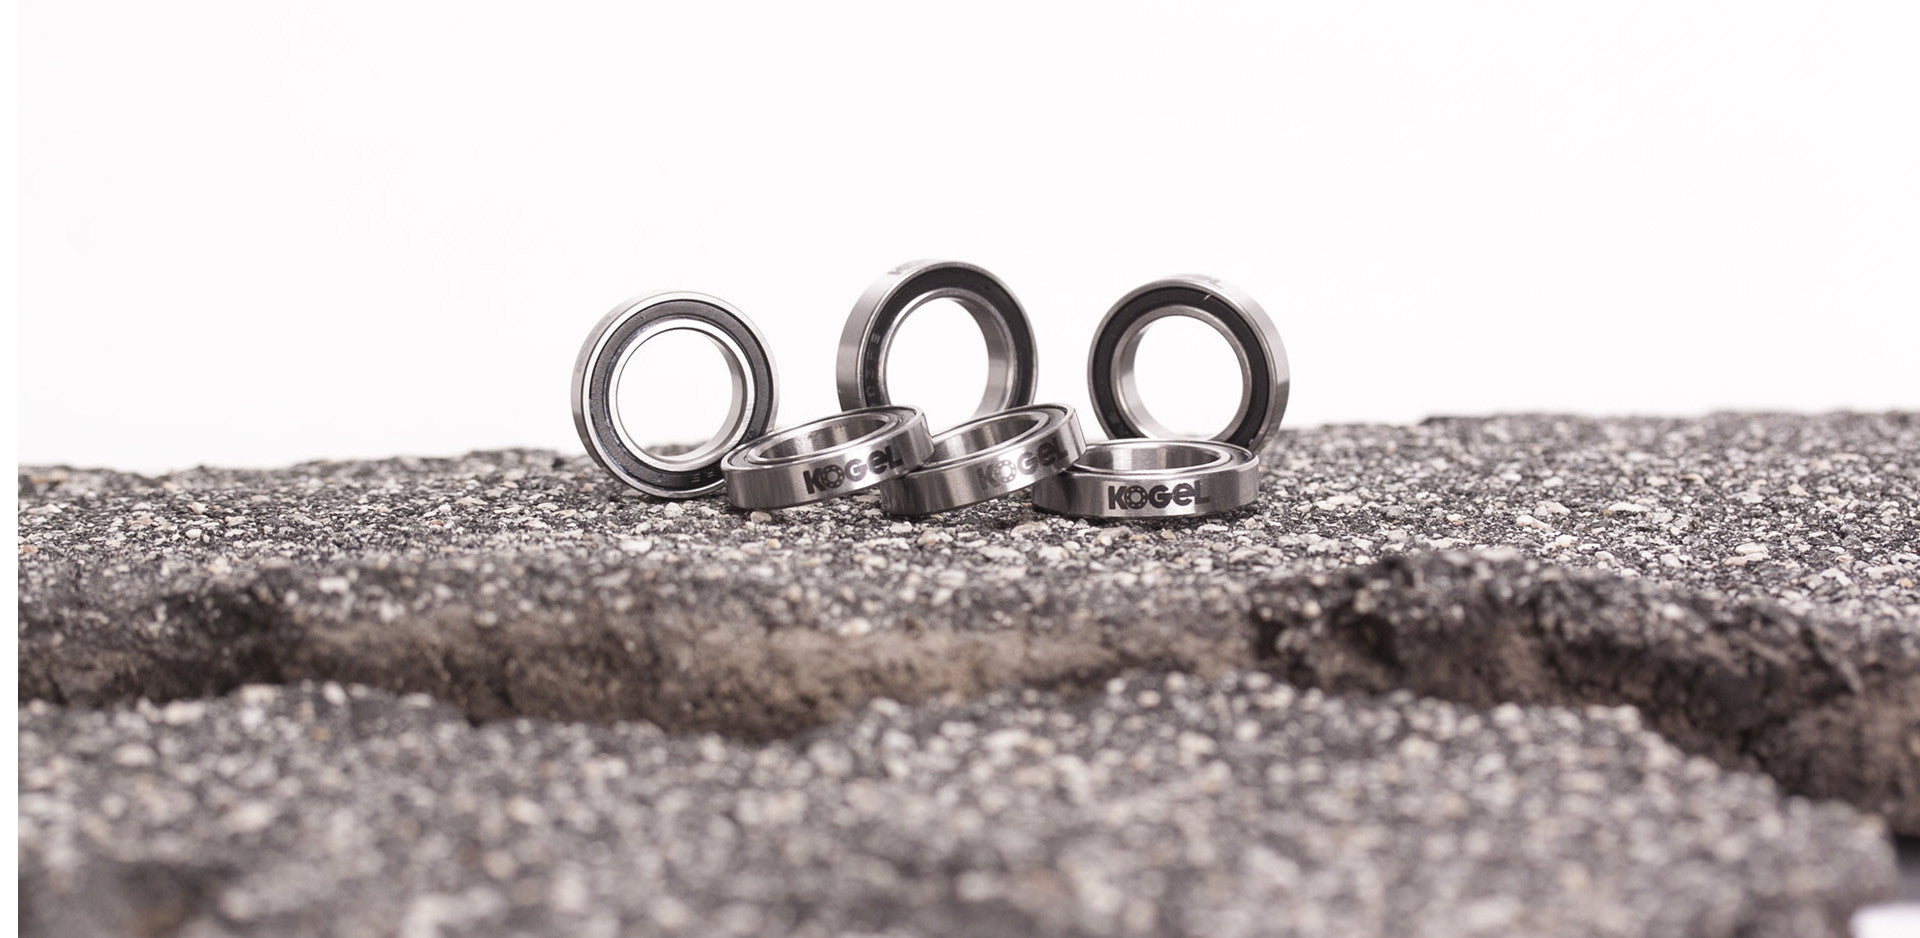 What makes a good ball bearing a great ball bearing for bicycles? Part 1